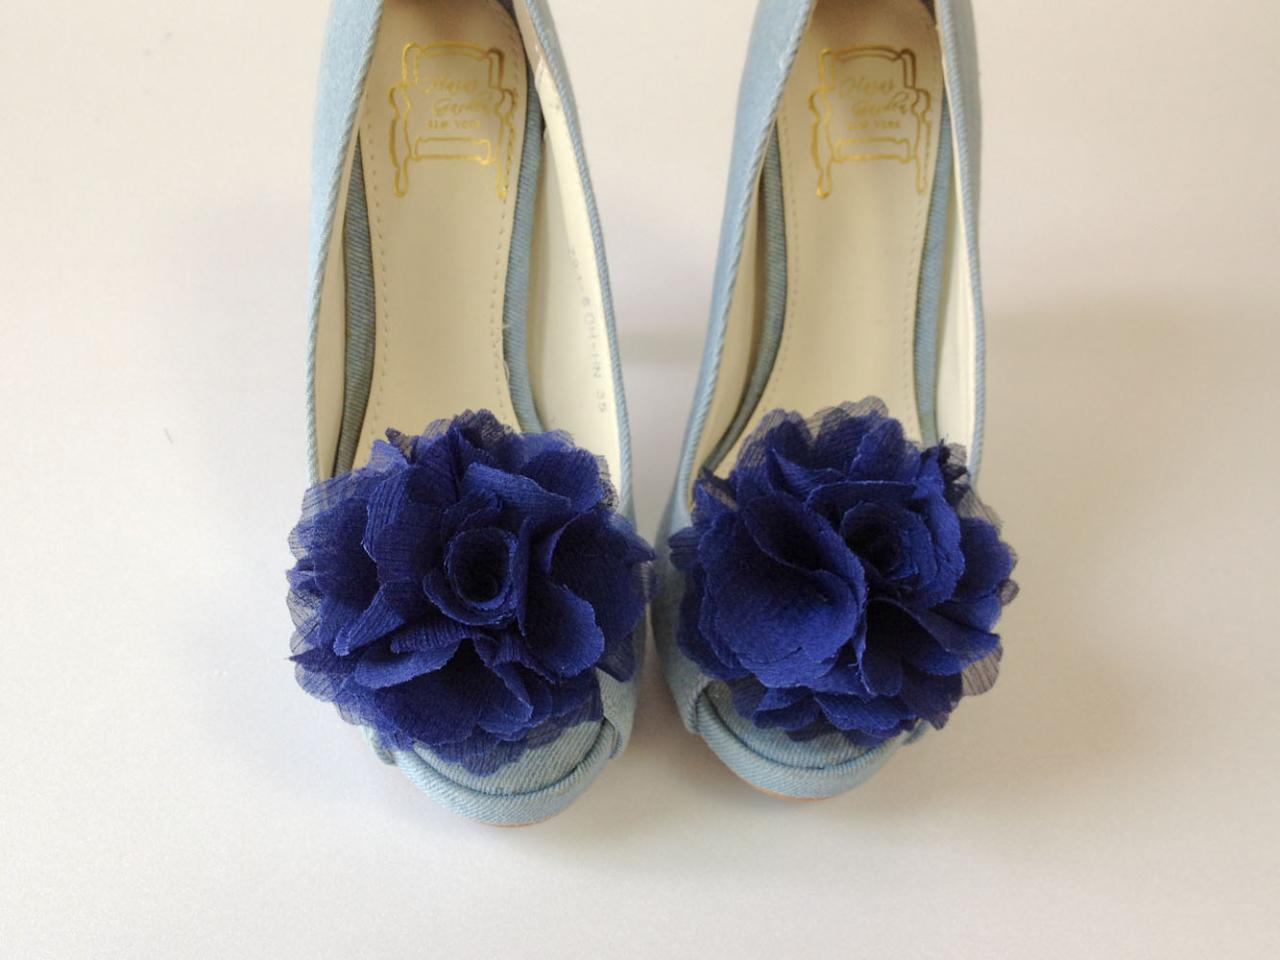 1 Pair (set Of 2) Navy Blue Chiffon Flower Shoe Clips For Bridal Wedding /choose Your Color